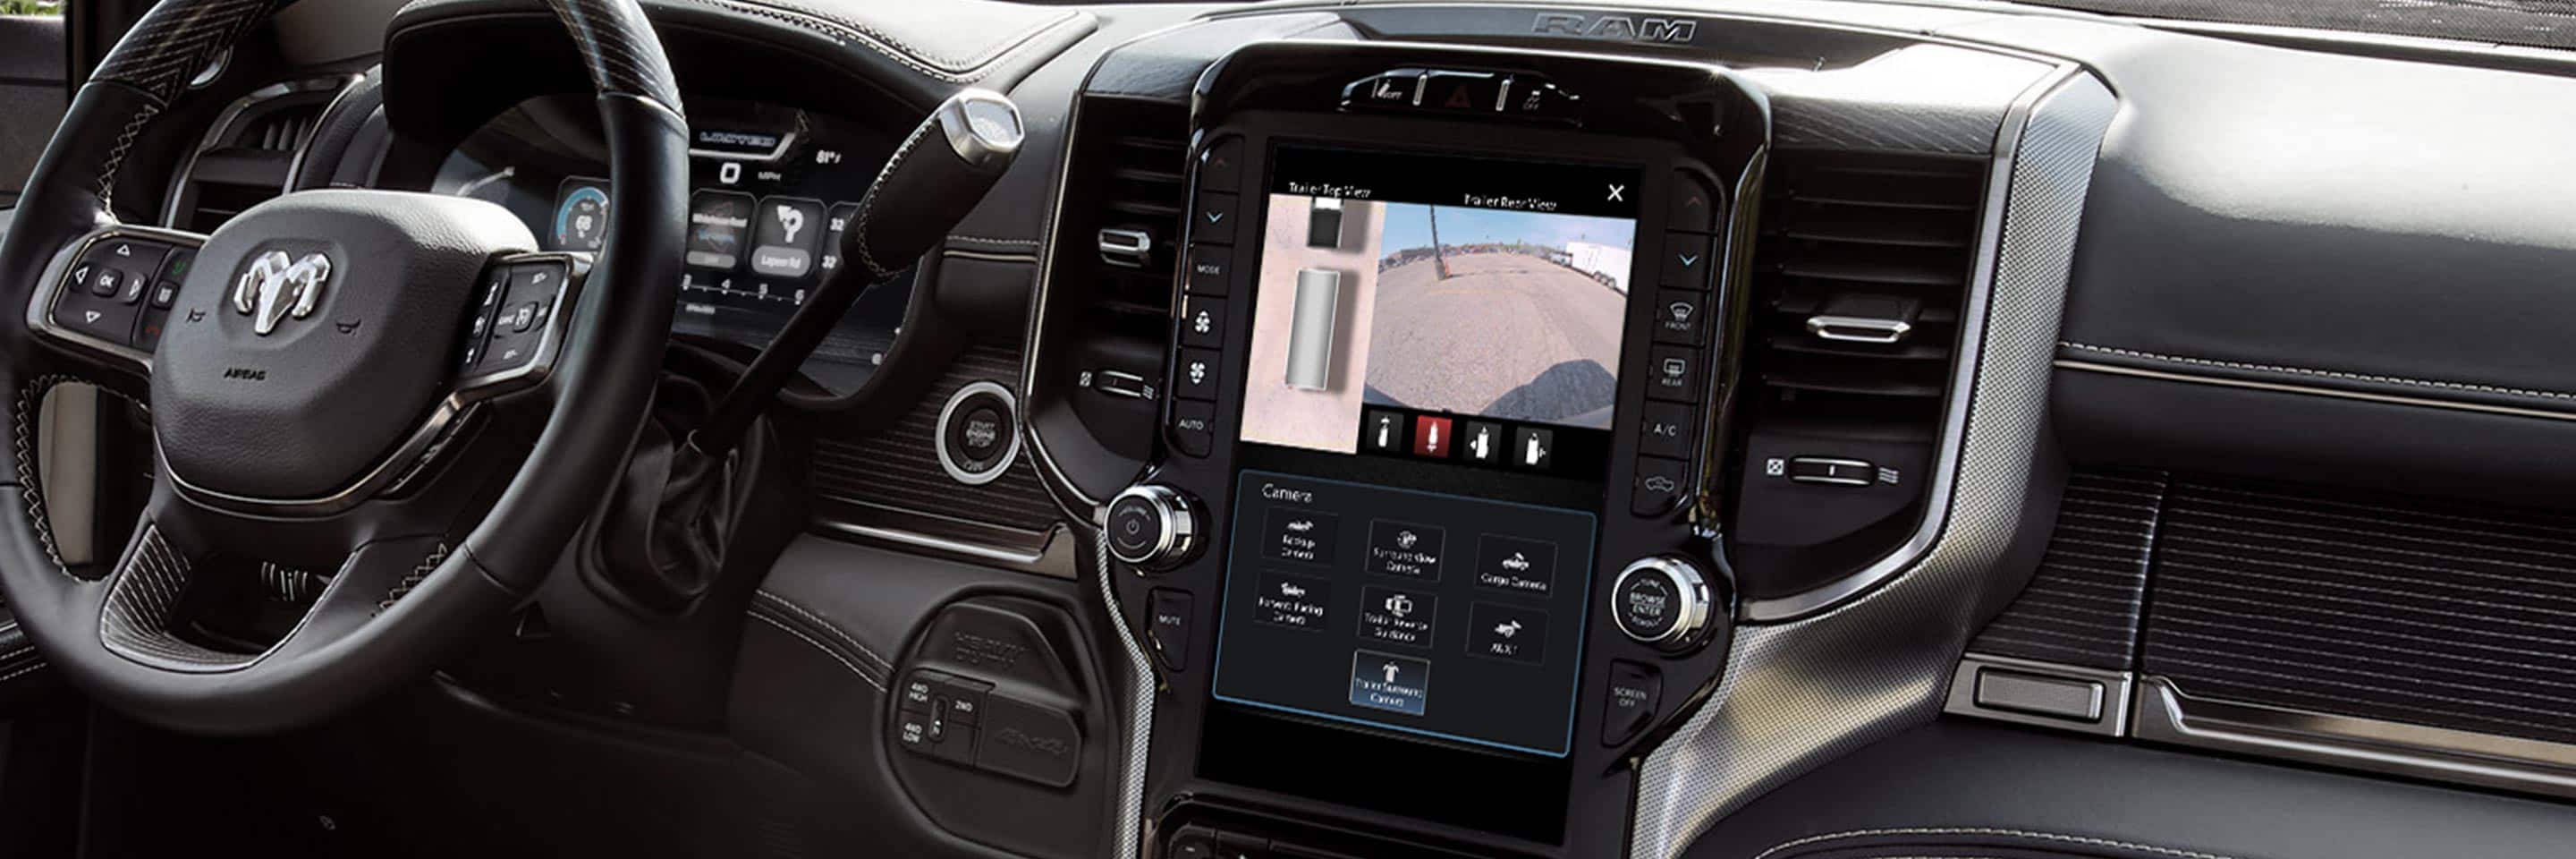 The interior of the 2023 Ram Chassis Cab focusing on the Uconnect touchscreen displaying the output of the surround view camera.